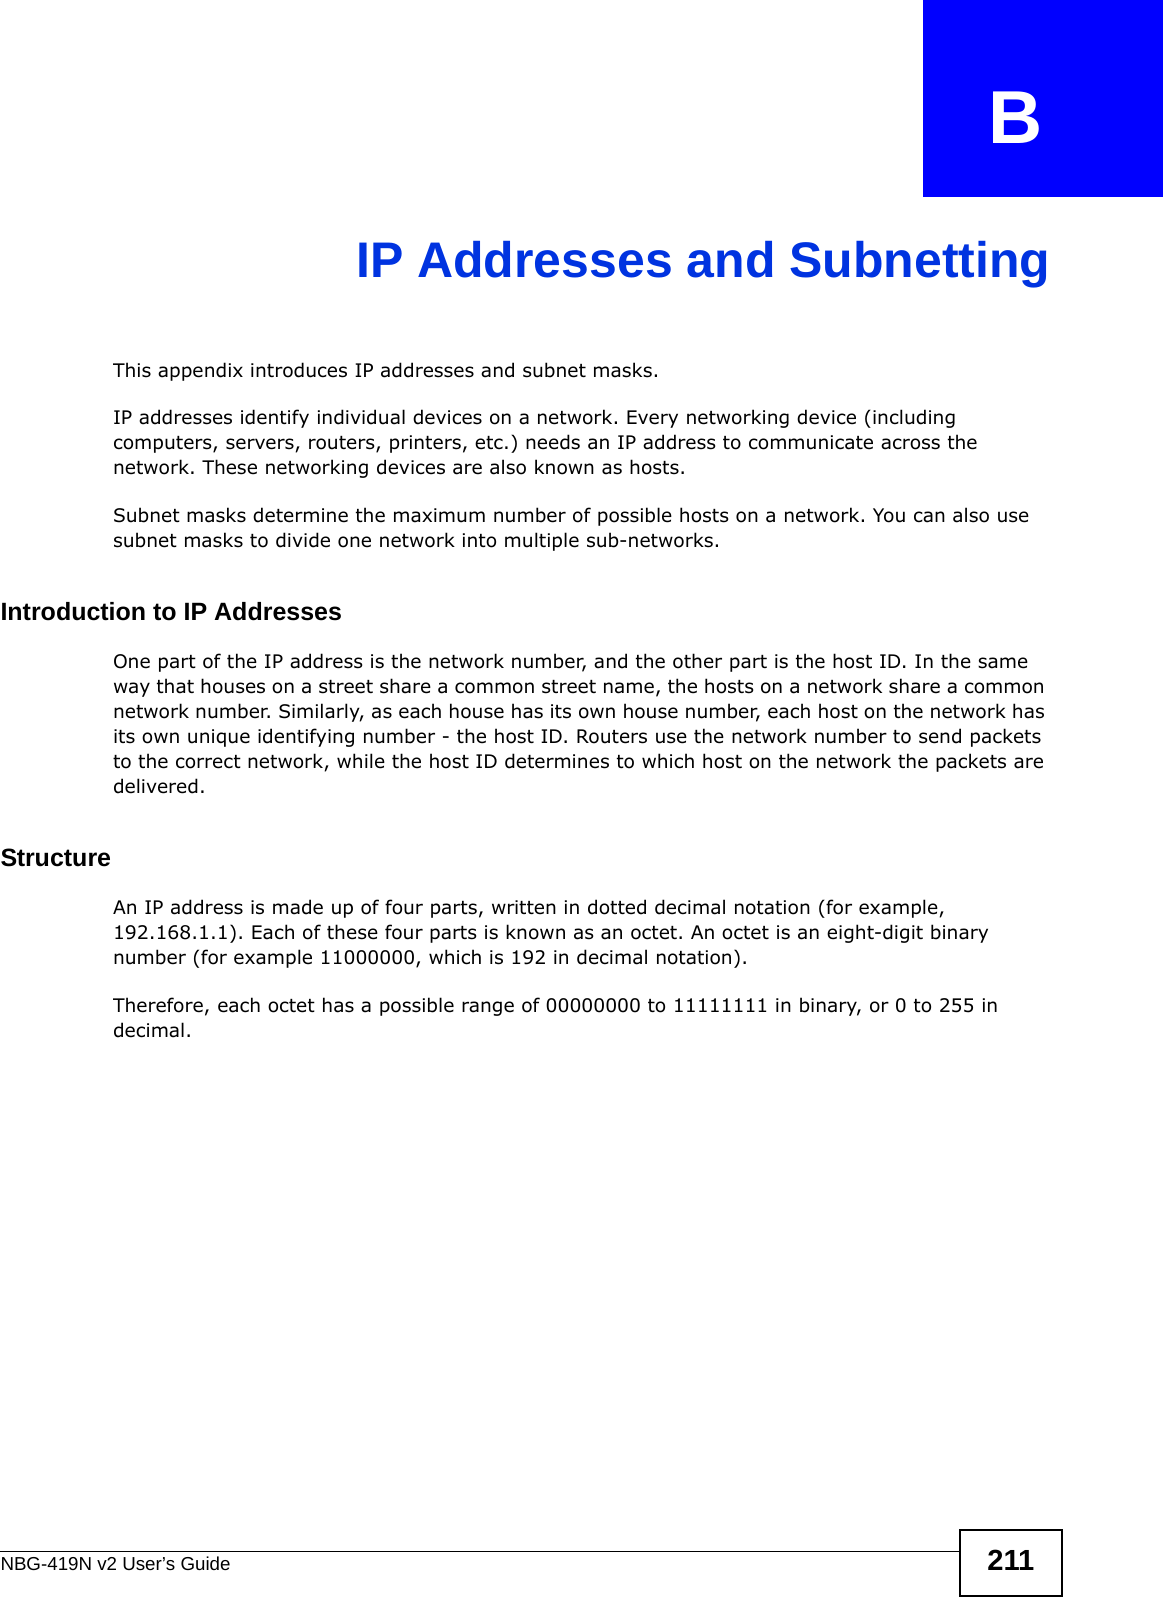 NBG-419N v2 User’s Guide 211APPENDIX   BIP Addresses and SubnettingThis appendix introduces IP addresses and subnet masks. IP addresses identify individual devices on a network. Every networking device (including computers, servers, routers, printers, etc.) needs an IP address to communicate across the network. These networking devices are also known as hosts.Subnet masks determine the maximum number of possible hosts on a network. You can also use subnet masks to divide one network into multiple sub-networks.Introduction to IP AddressesOne part of the IP address is the network number, and the other part is the host ID. In the same way that houses on a street share a common street name, the hosts on a network share a common network number. Similarly, as each house has its own house number, each host on the network has its own unique identifying number - the host ID. Routers use the network number to send packets to the correct network, while the host ID determines to which host on the network the packets are delivered.StructureAn IP address is made up of four parts, written in dotted decimal notation (for example, 192.168.1.1). Each of these four parts is known as an octet. An octet is an eight-digit binary number (for example 11000000, which is 192 in decimal notation). Therefore, each octet has a possible range of 00000000 to 11111111 in binary, or 0 to 255 in decimal.